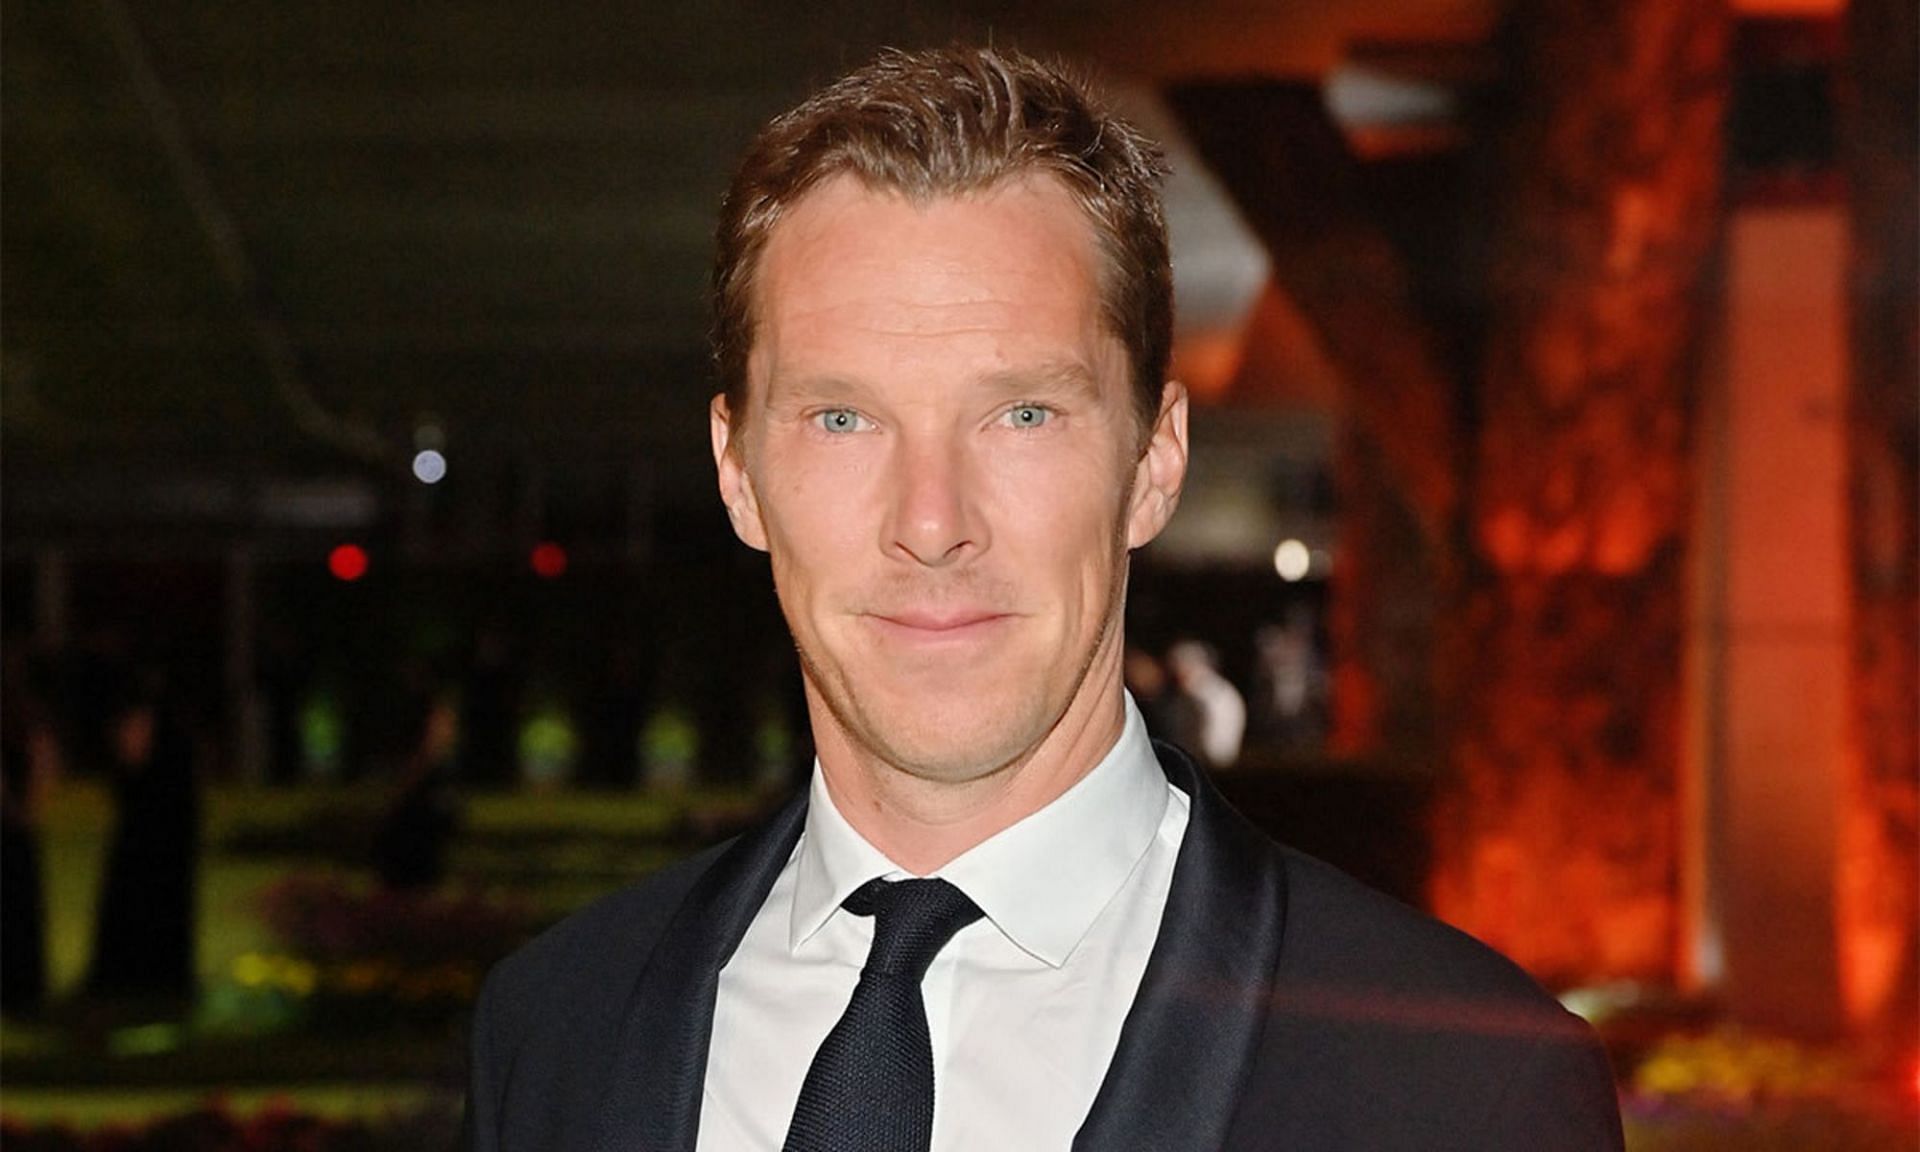 Barbadians seek reparations from Benedict Cumberbatch, a descendant of his slave-owning family (Image via Getty Images)